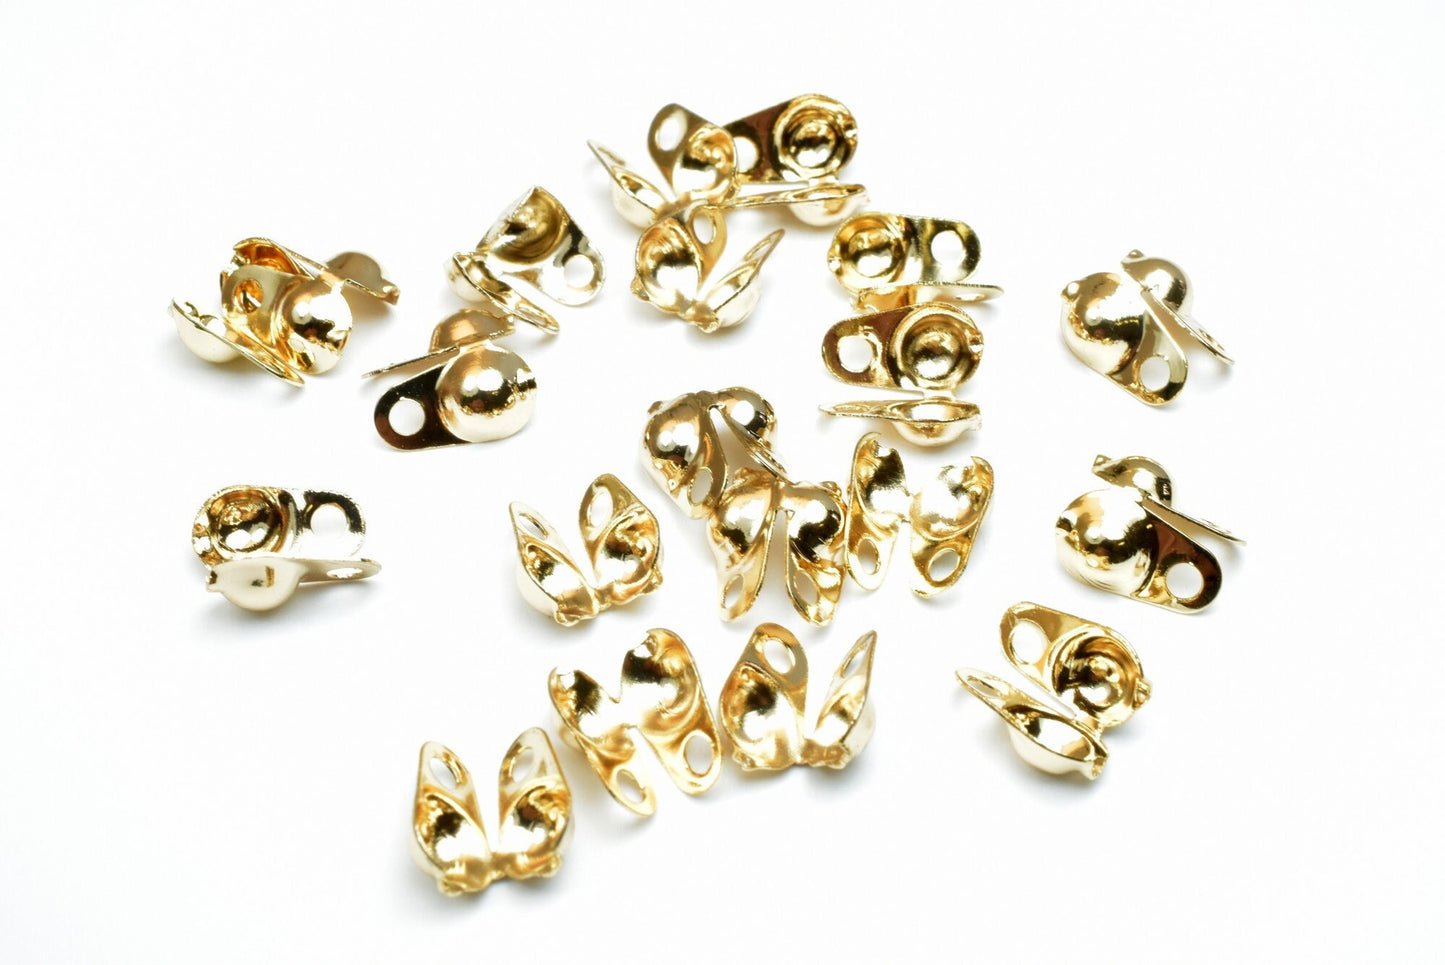 18k gold filled EP ball chain crimp cover end tip beads size 1.5mm, 2.4mm, 3.2mm, 4mm for jewelry making findings